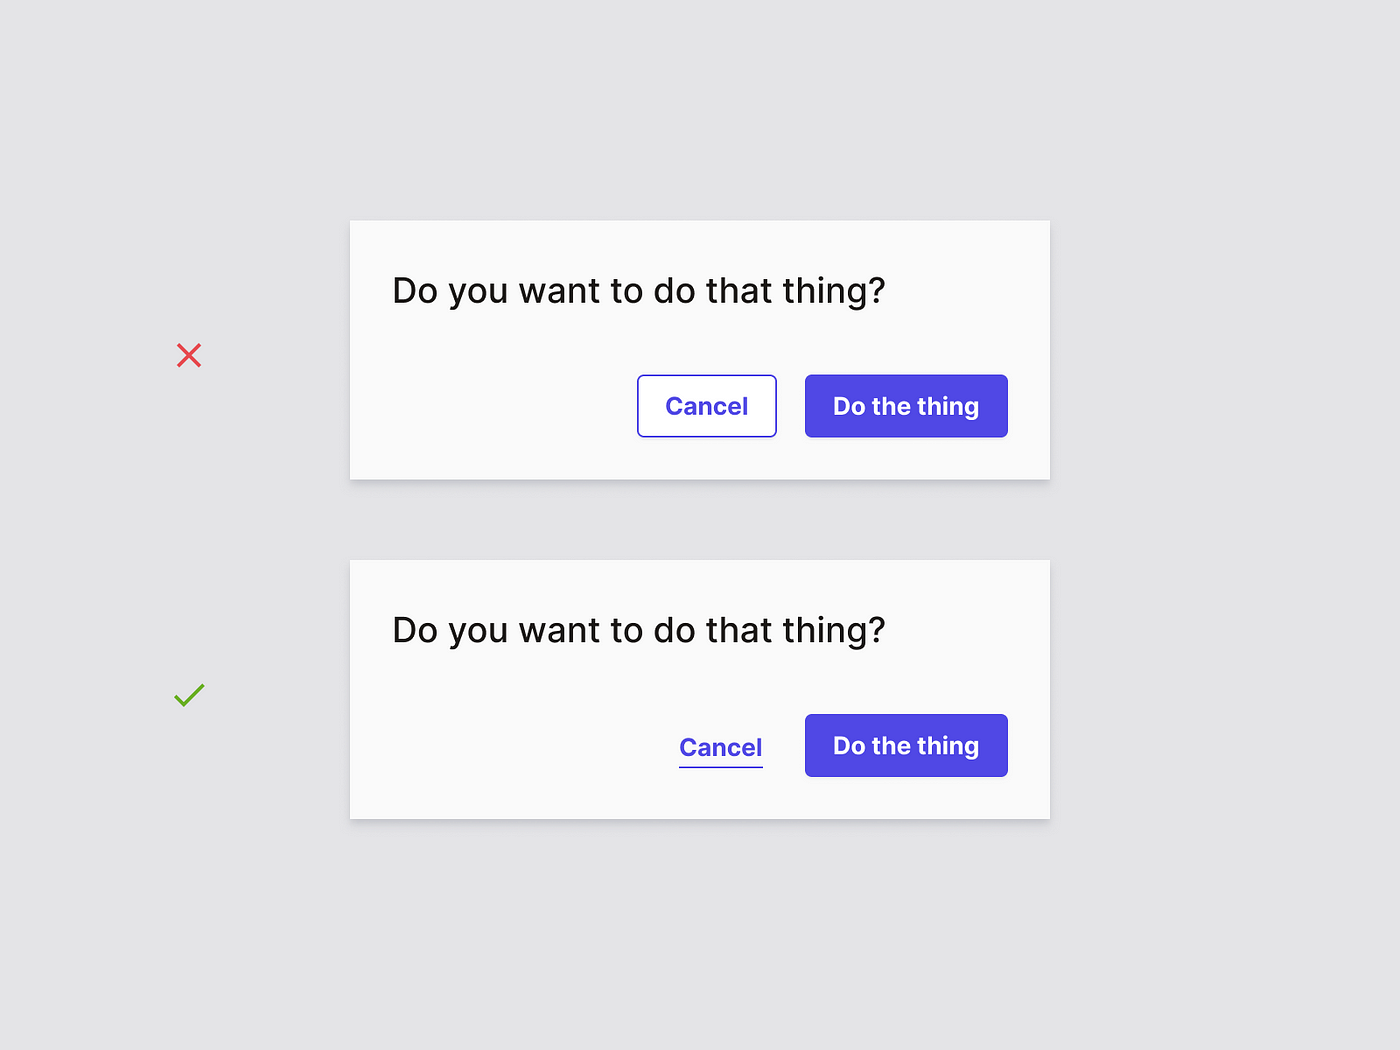 Cancel as a button or a link? Which is best UX practice?